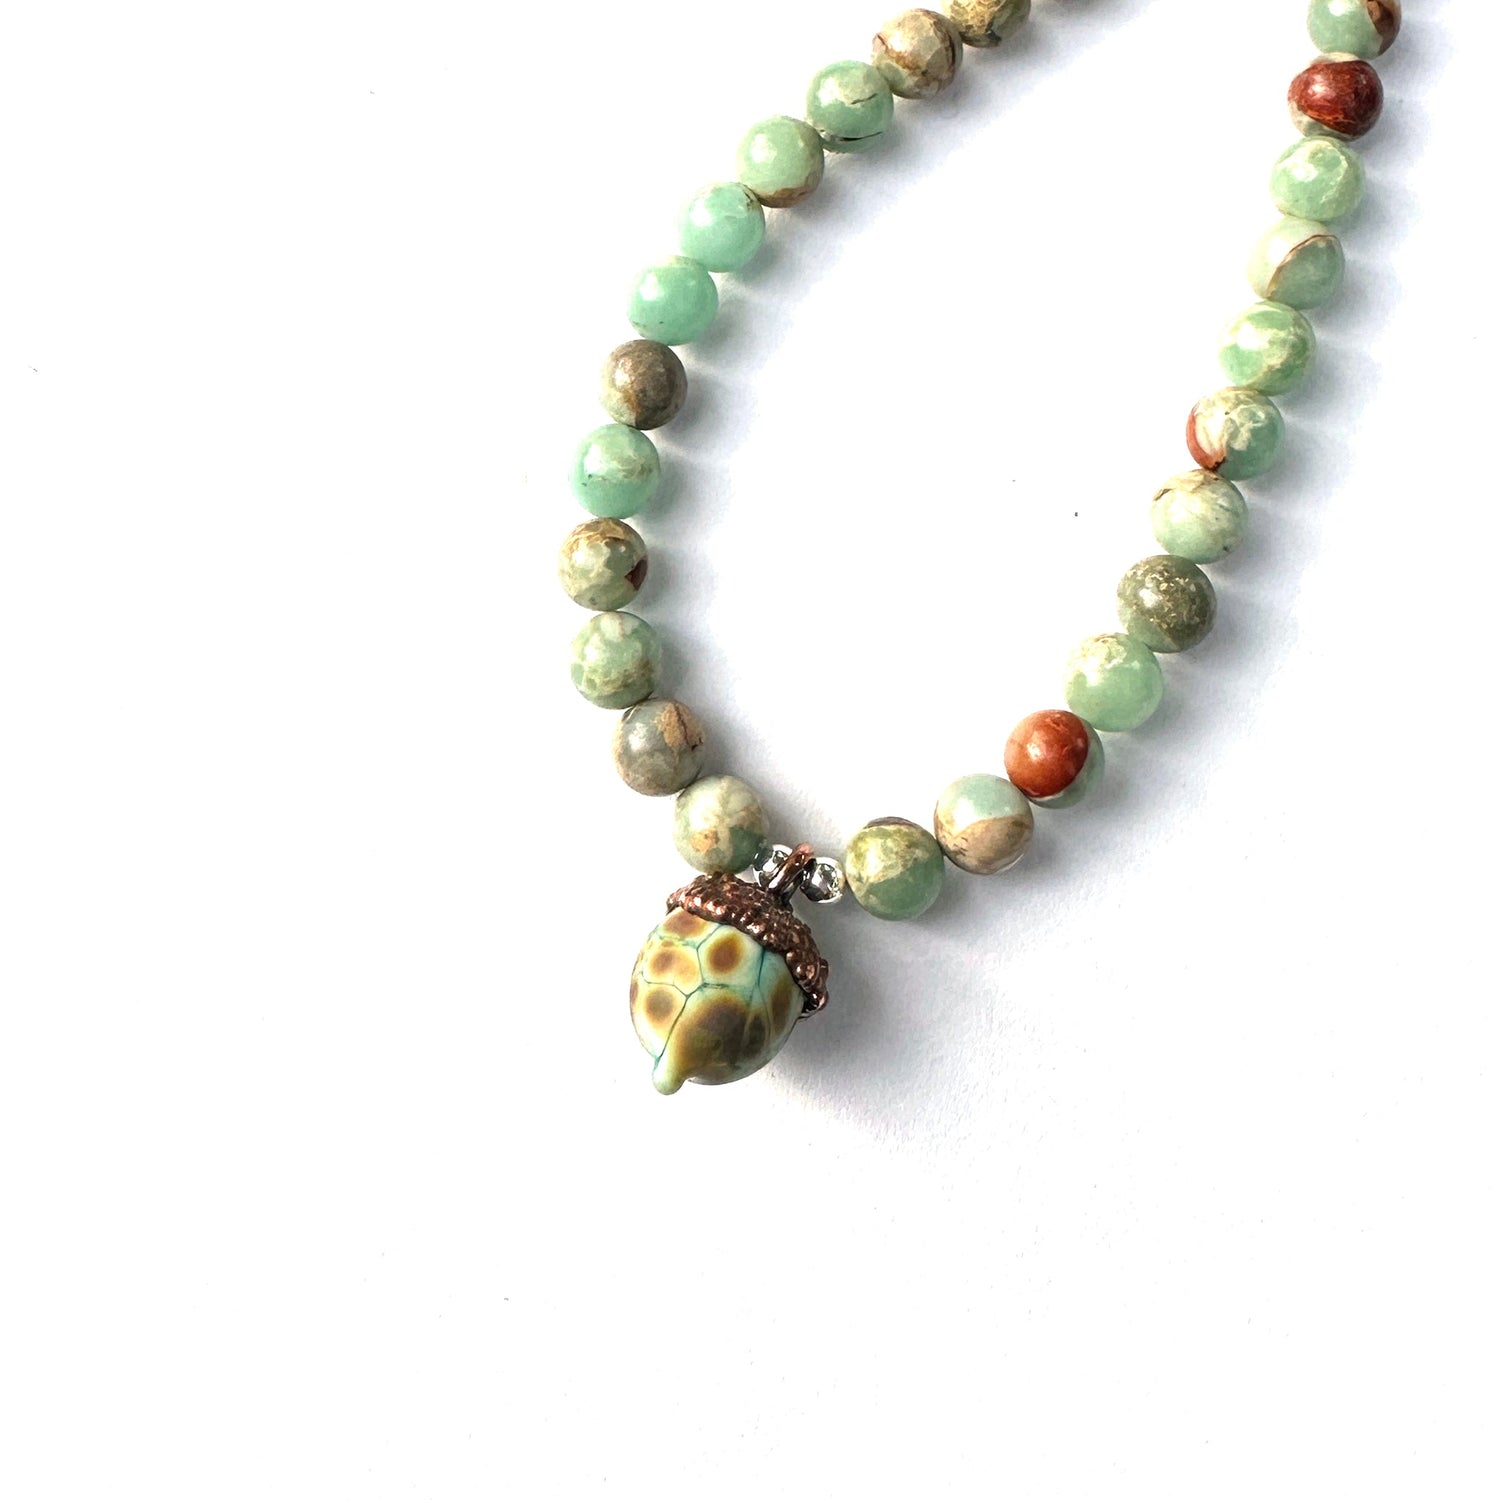 Acorn and Gemstone Necklace - The Glass Acorn